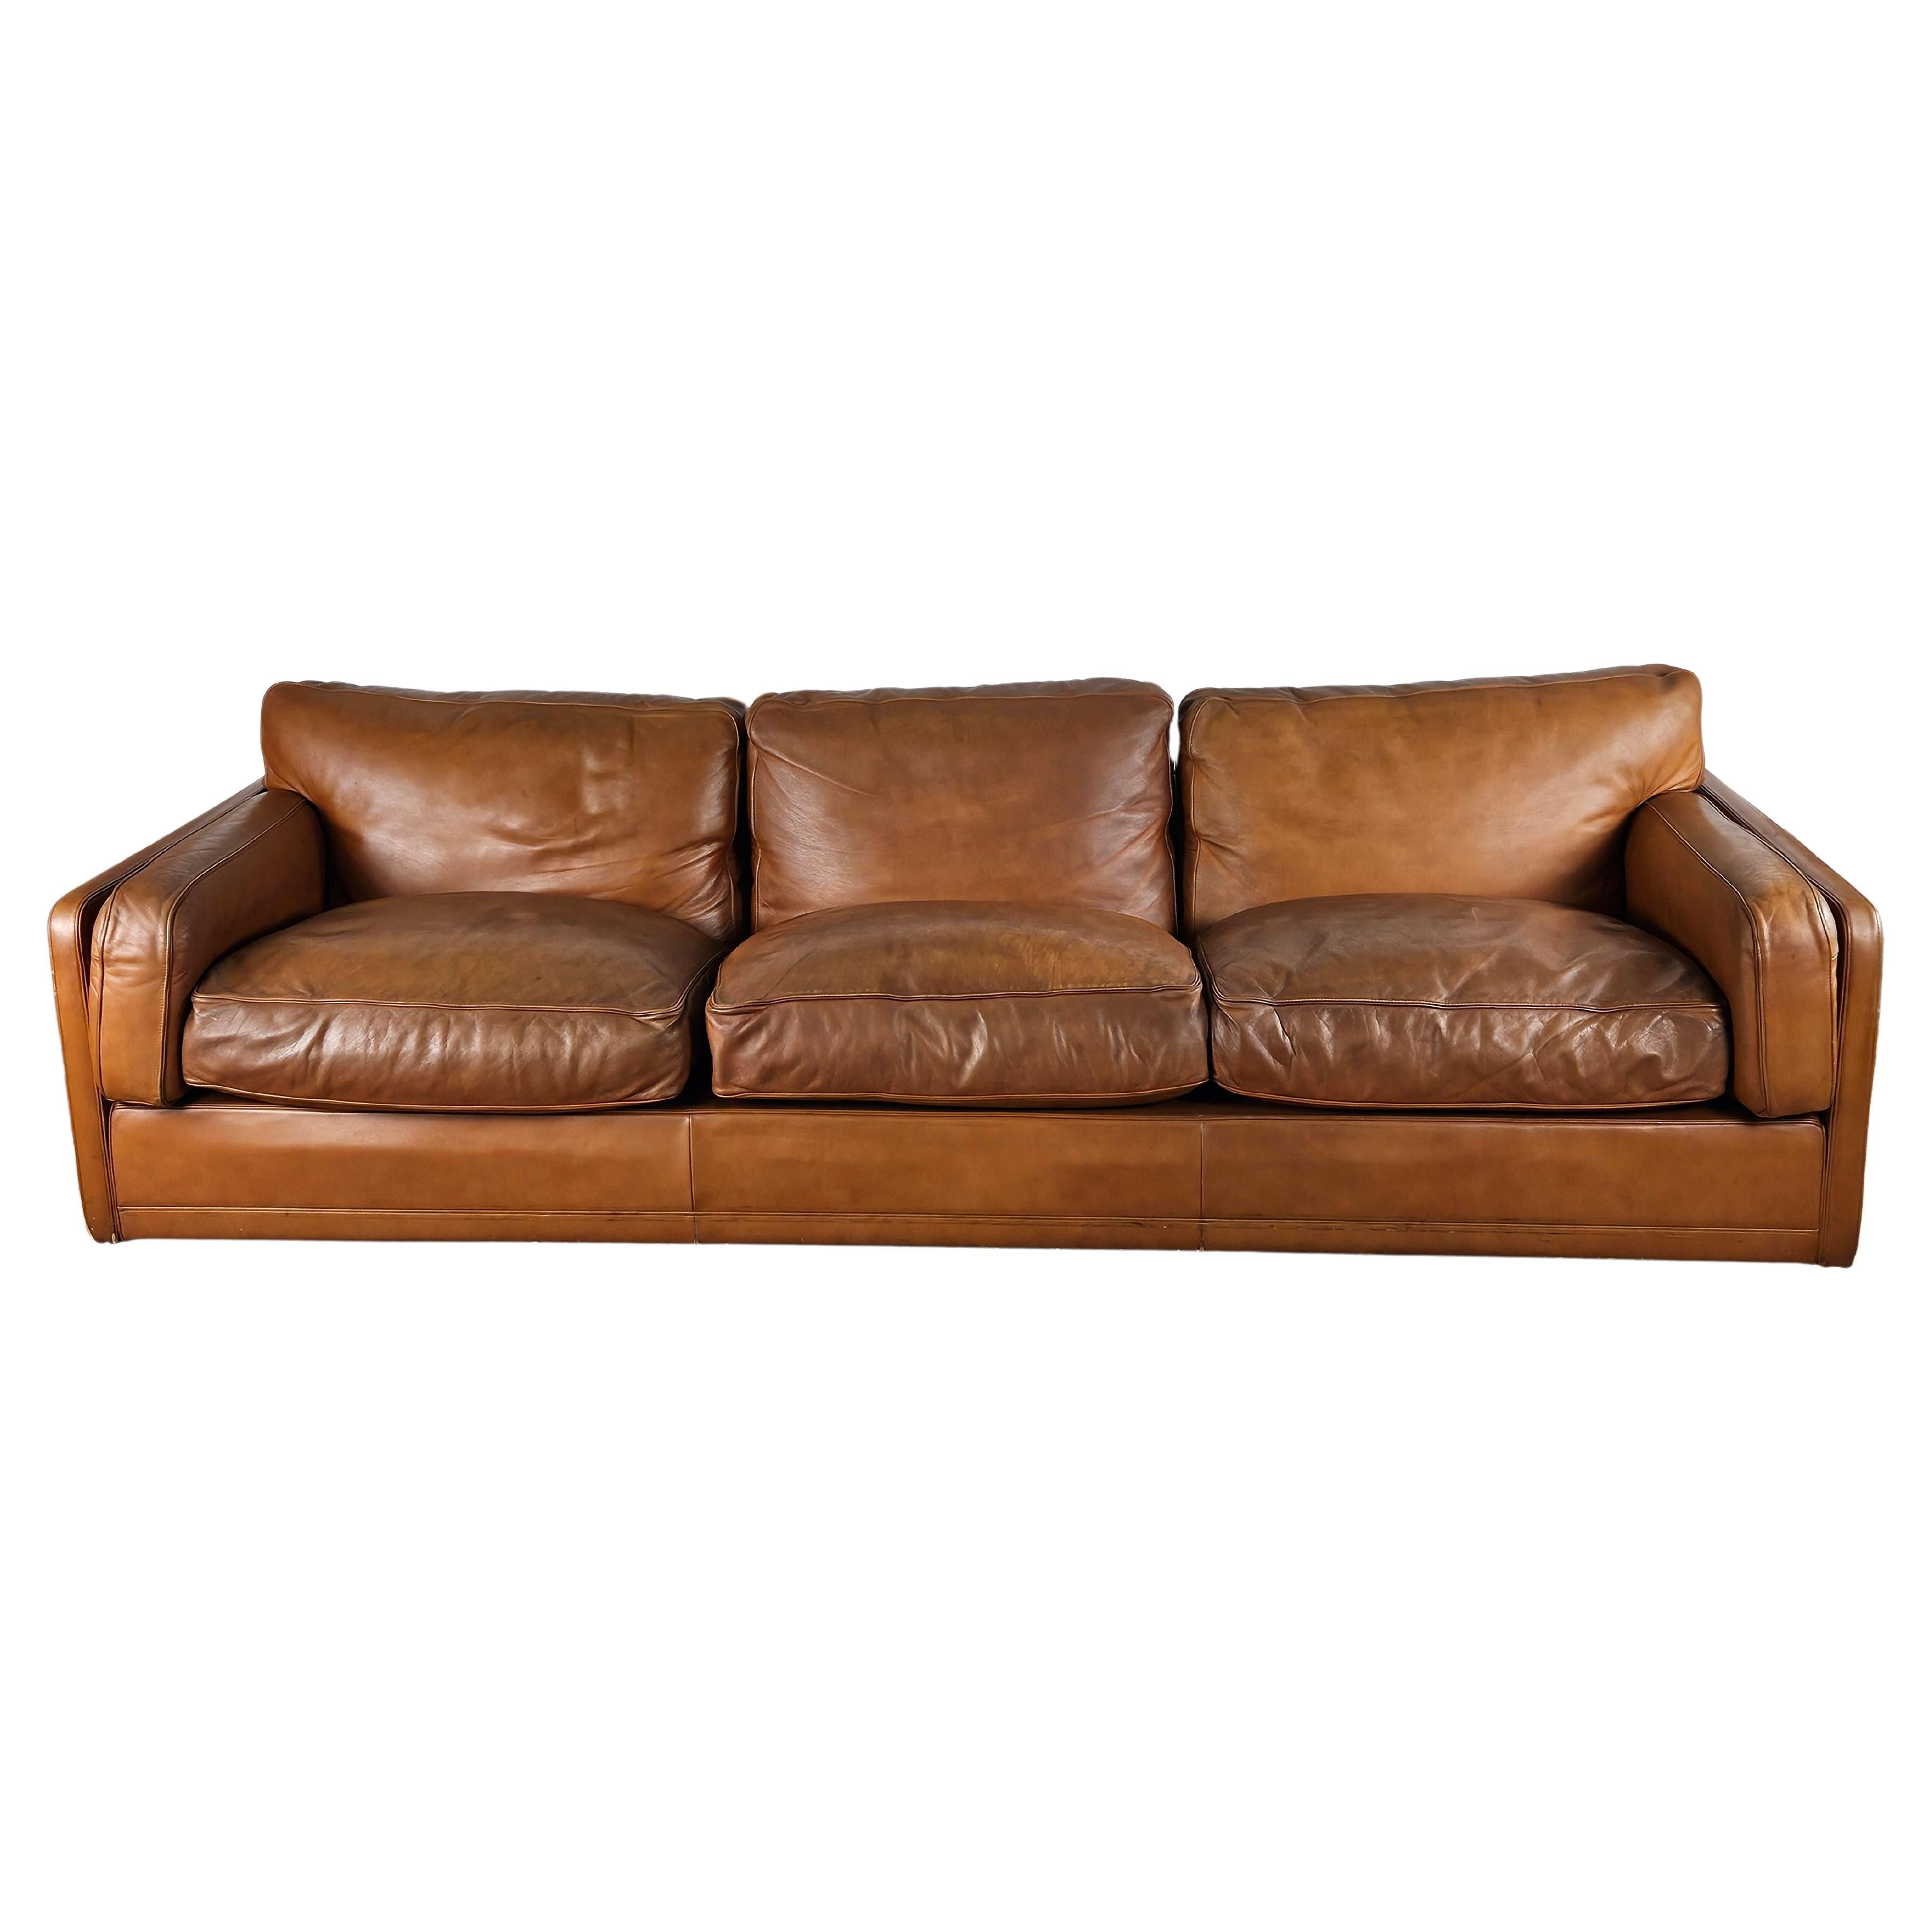 Poltrona Frau three-seater 1970s sofa in cognac-colored leather For Sale